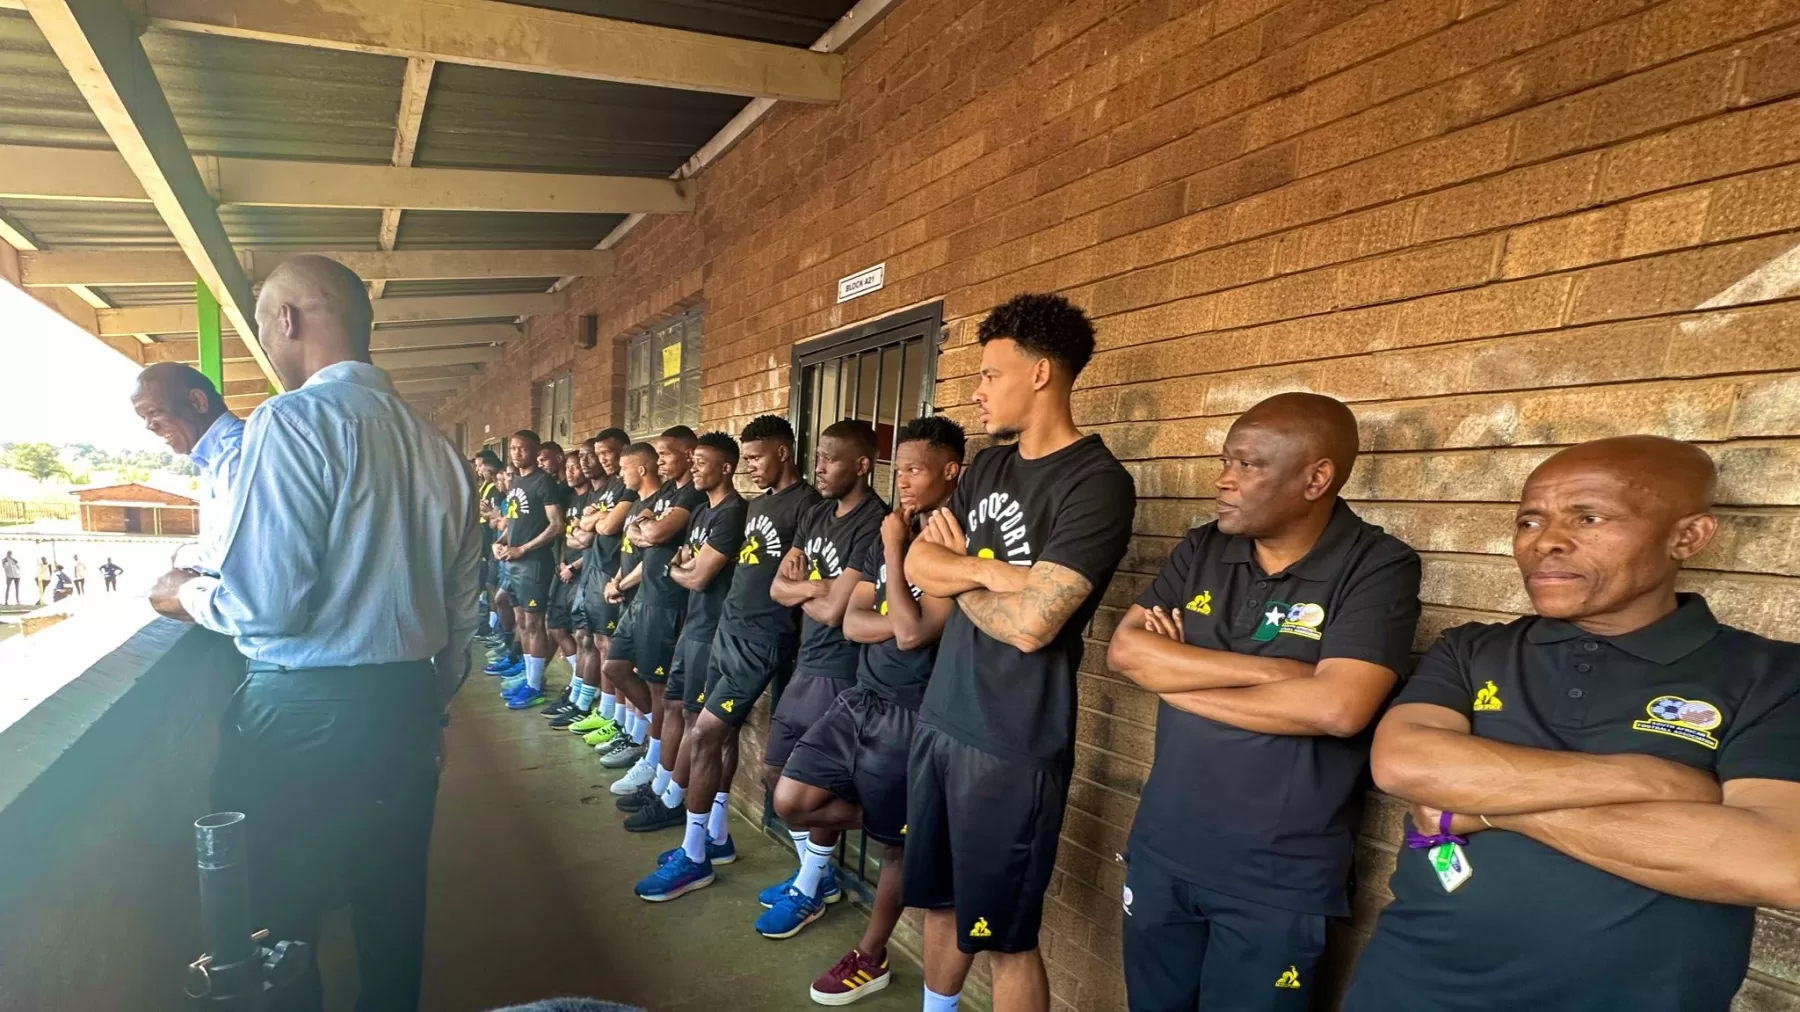 Bafana Bafana players Ronwen Williams and Percy Tau take the blame for poor home support  